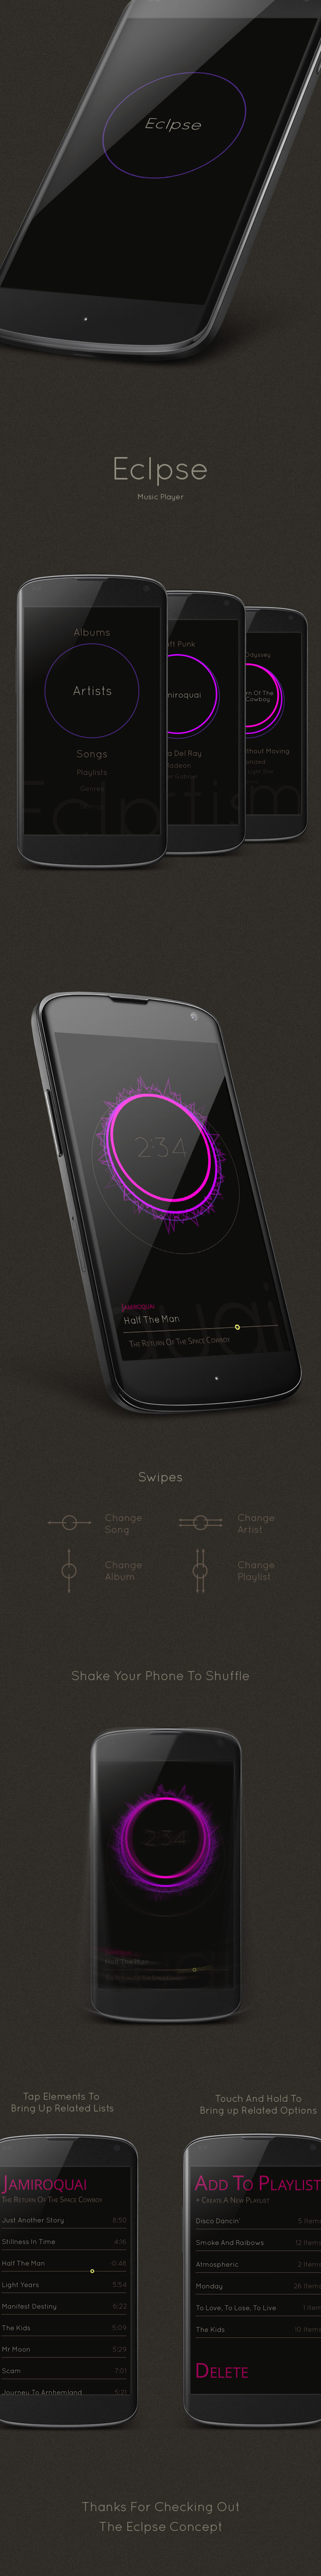 Music Player  mobile  UI  UX  interface